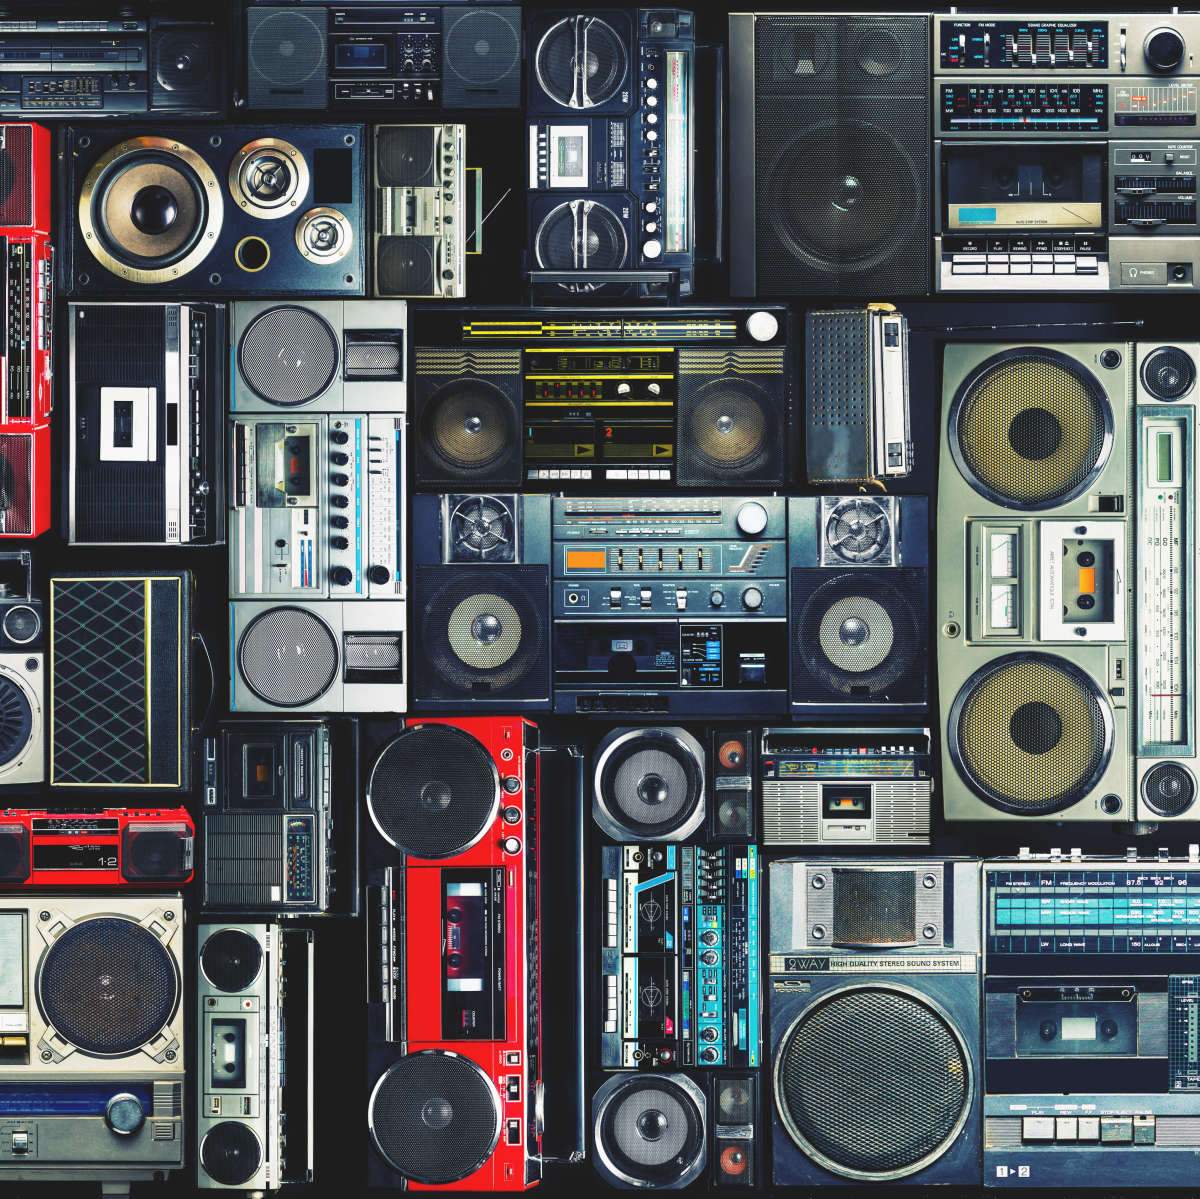 80s boombox drawing